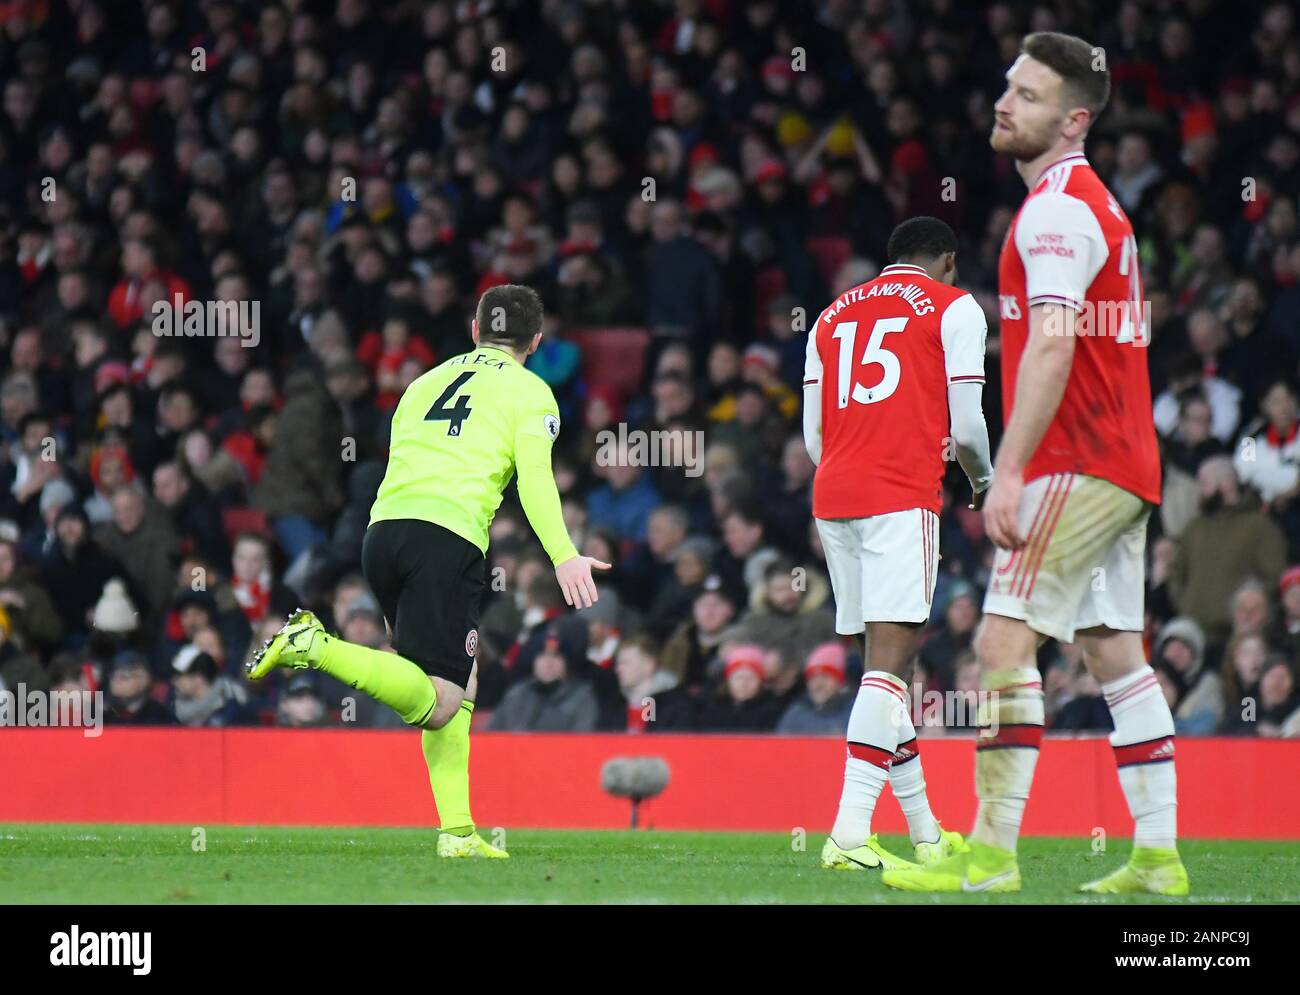 LONDON, ENGLAND - JANUARY 18, 2020: John Fleck of Sheffield celerbates after he scored during the 2019/20 Premier League game between Arsenal FC and Sheffield United FC at Emirates Stadium. Stock Photo